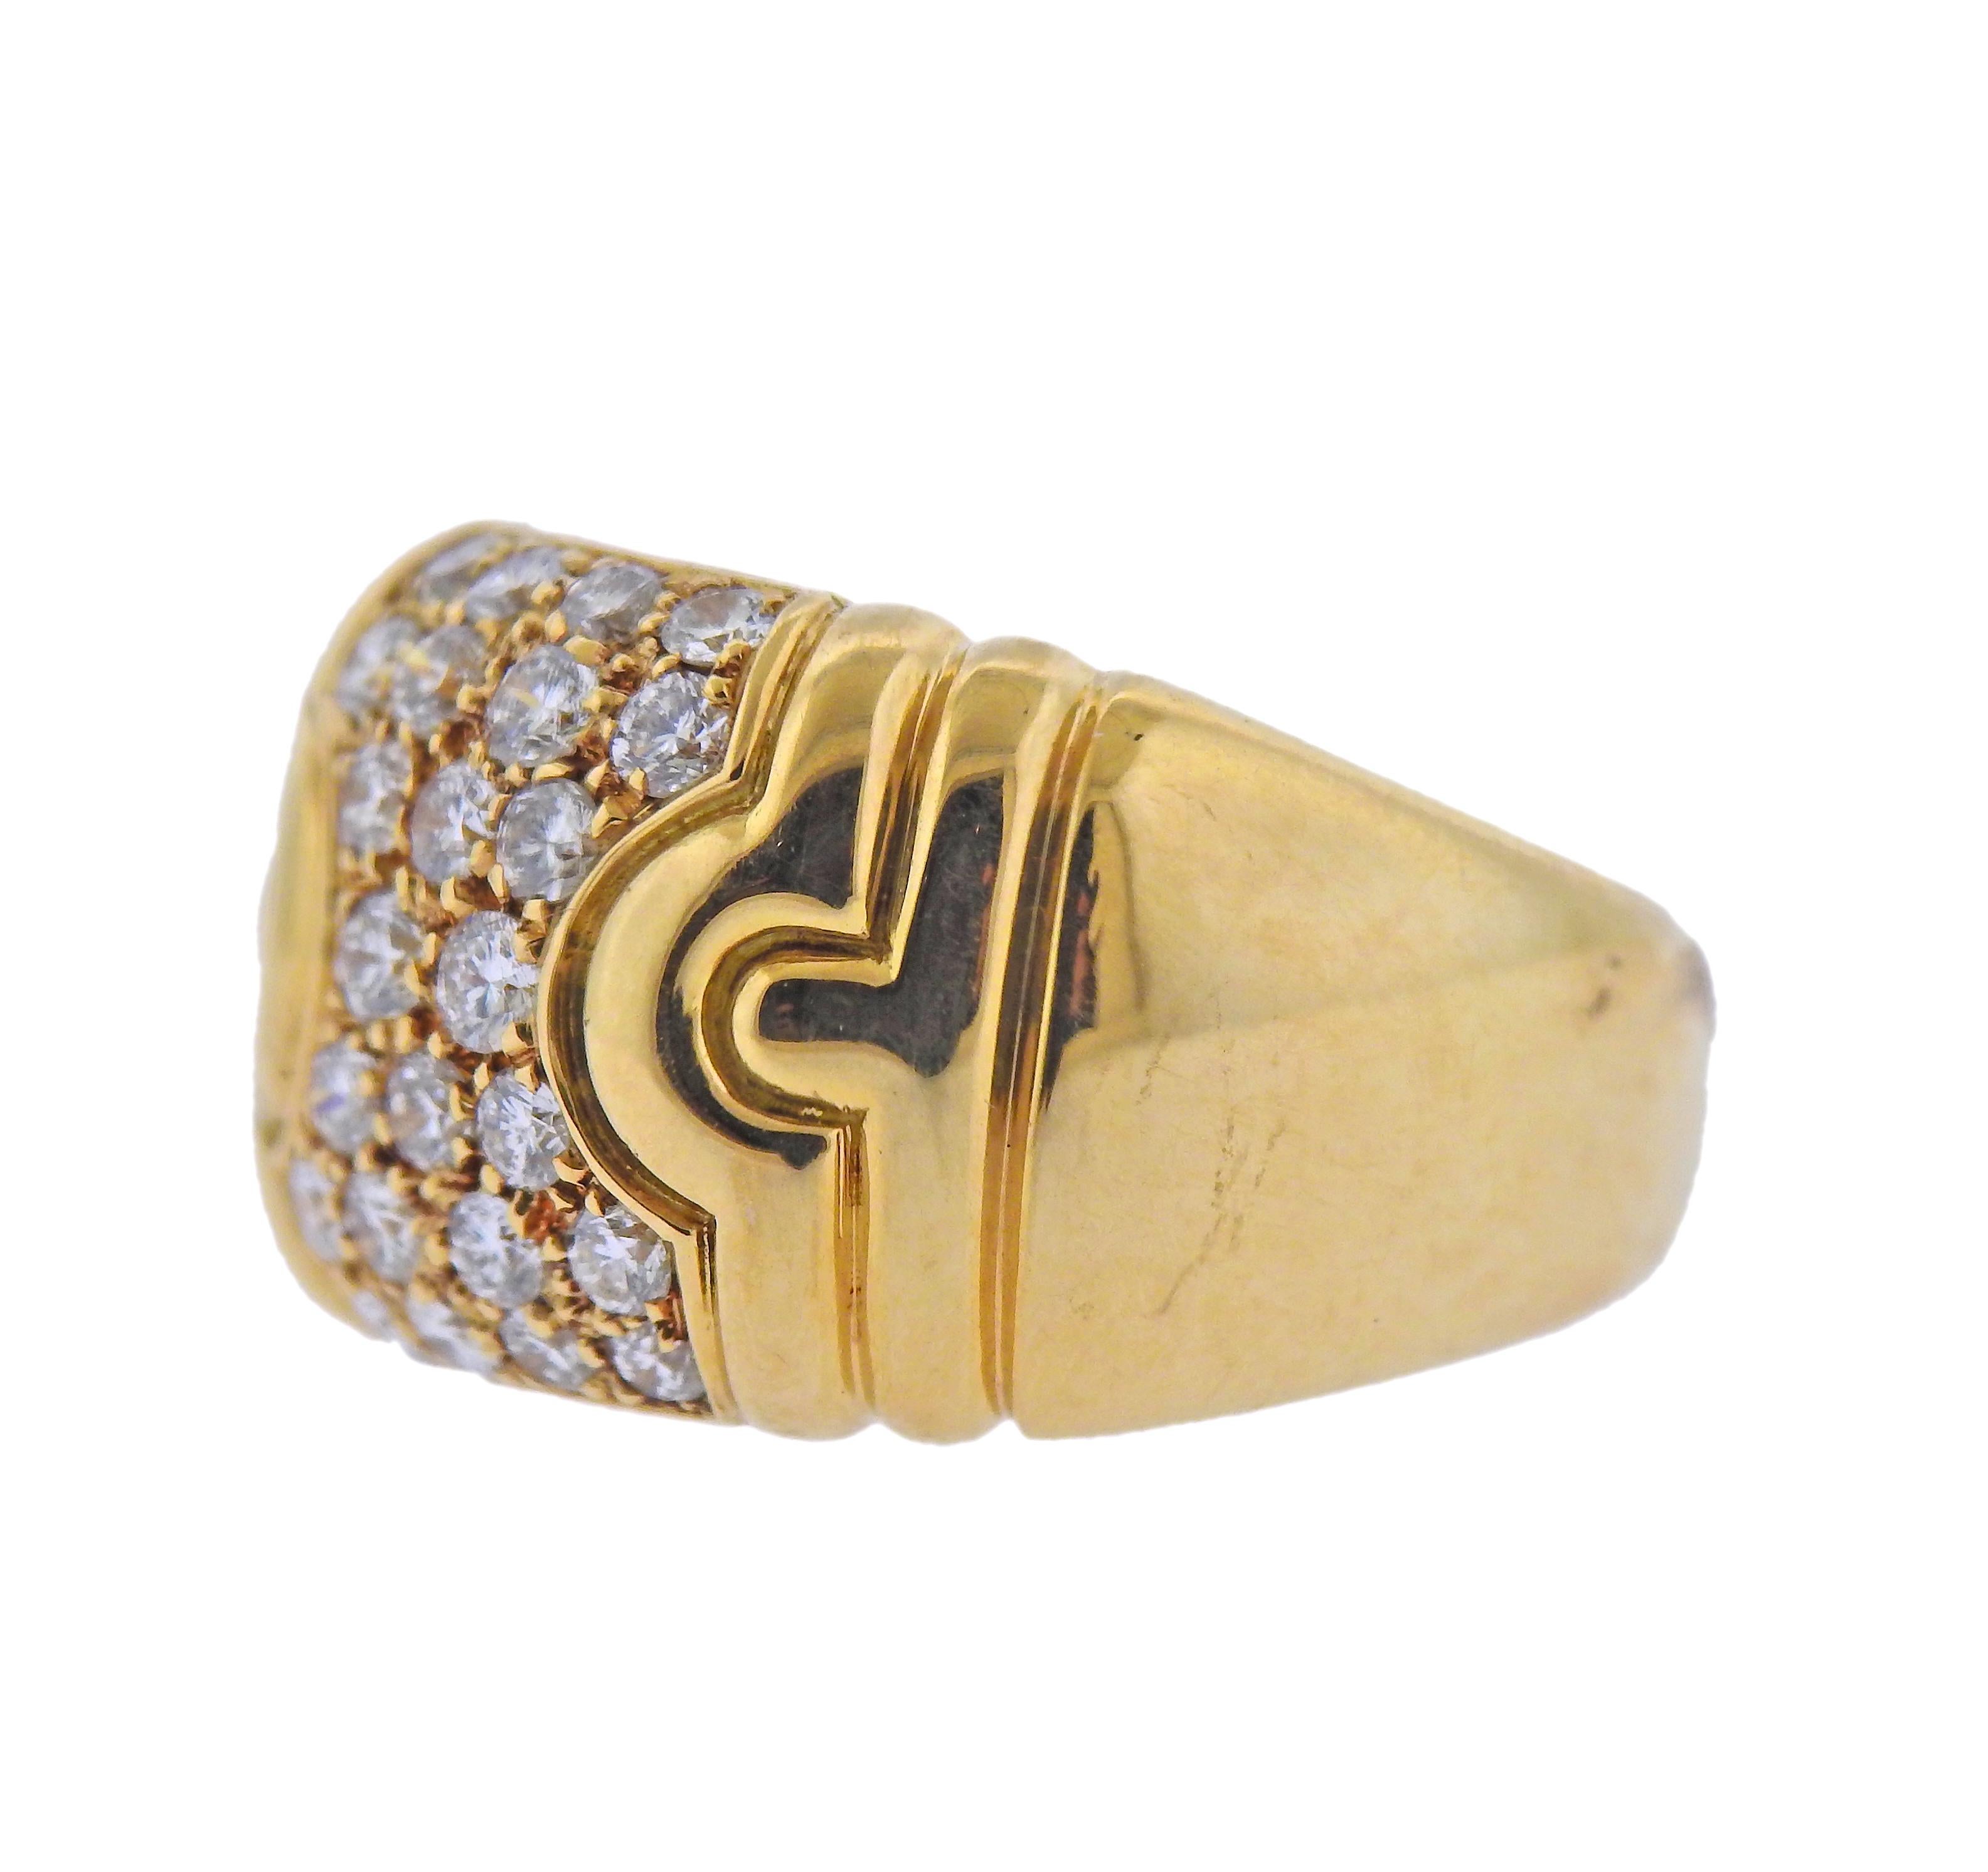 18k yellow gold and diamond Parentesi ring by Bvlgari. Set with approx. 0.75ctw in diamonds. Ring size 6, ring top is 13mm wide. Marked: 750, Bvlgari, Italian mark. Weight - 12.7 grams.